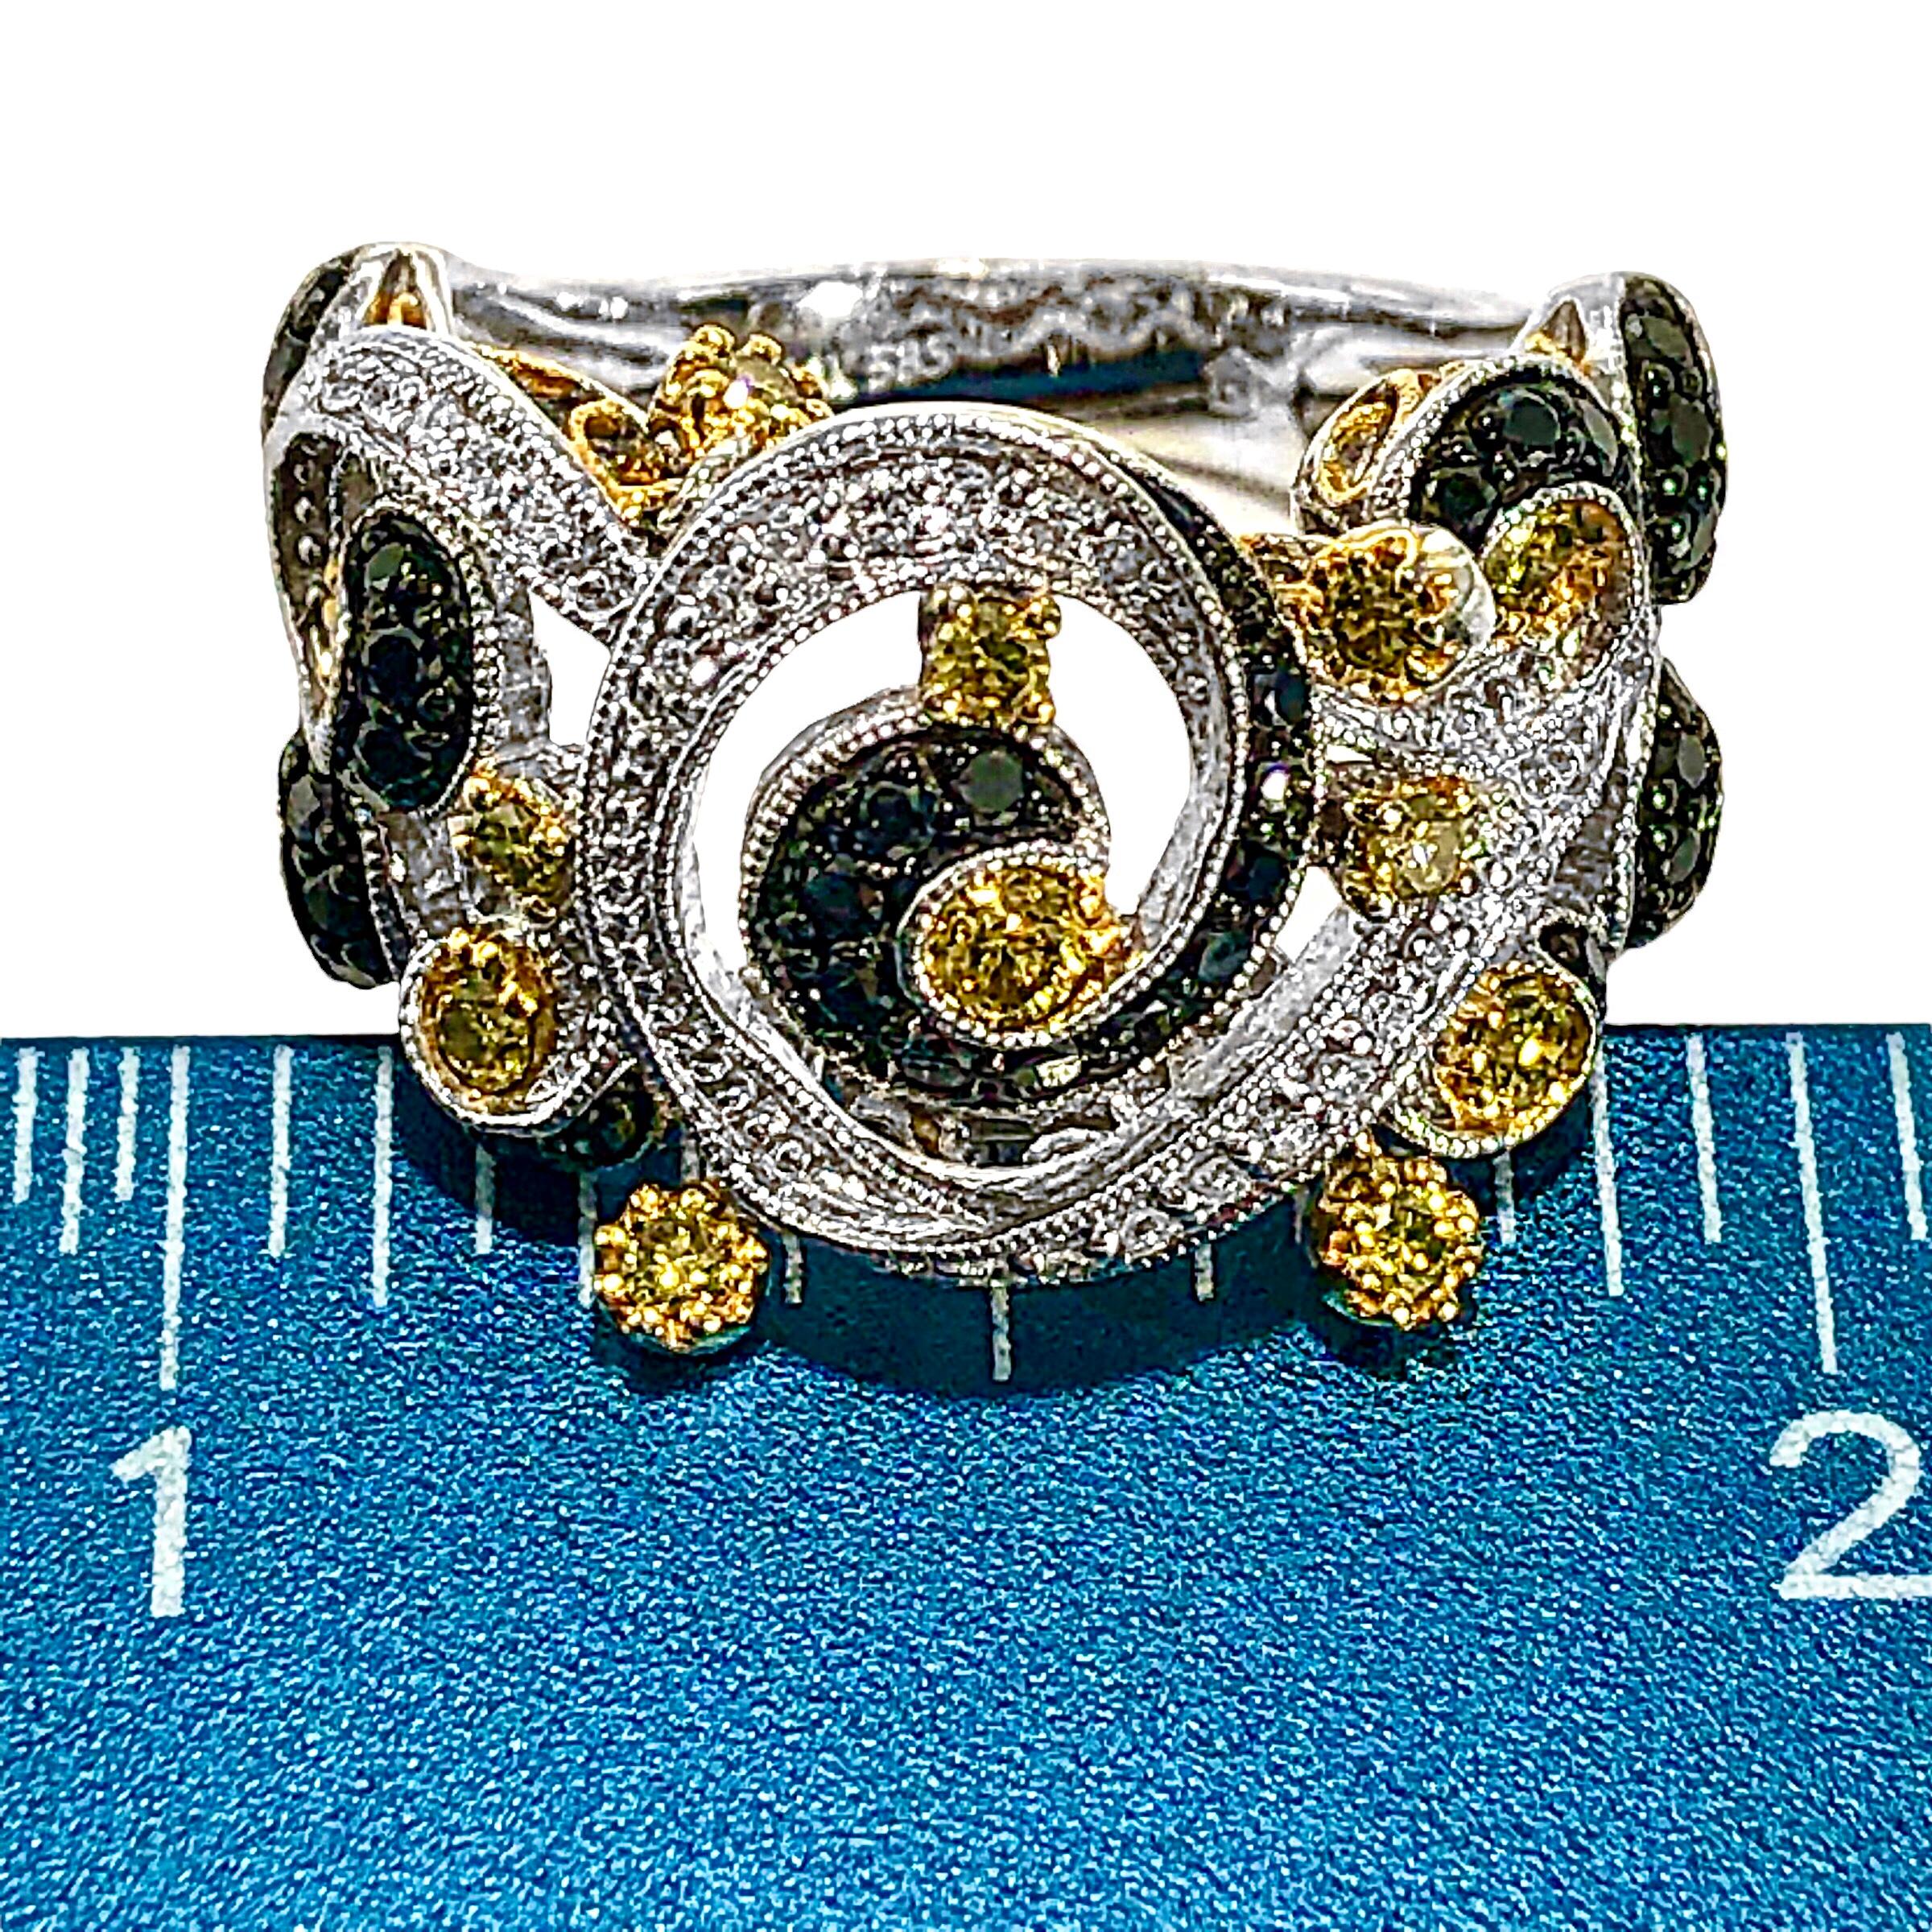 Modern 14K White Gold Ring with Fancy Yellow and Black Diamonds in Swirl Motif 5